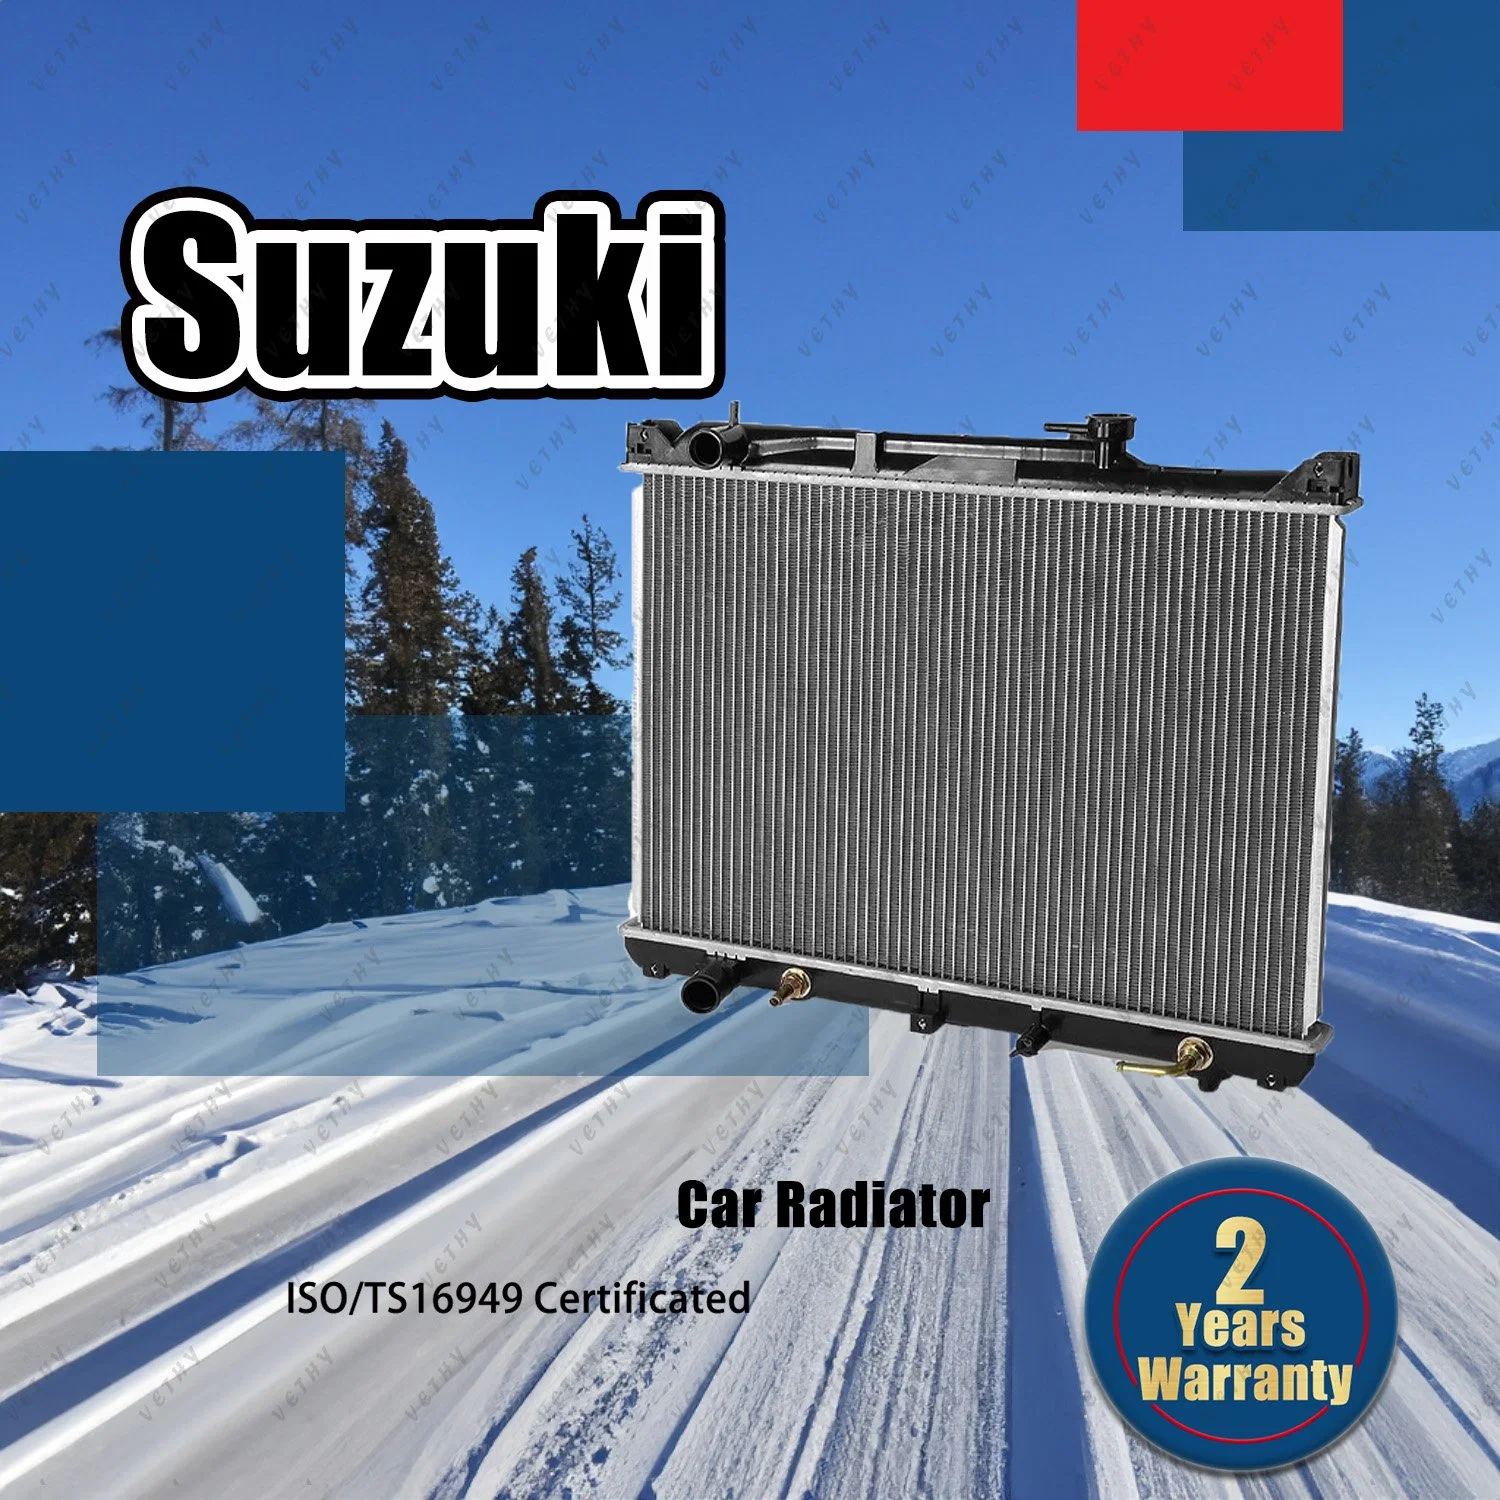 Suzuki S-Cross Radiator Efficiency: Stainless Steel Core and Cooling Fins for Urban Exploration